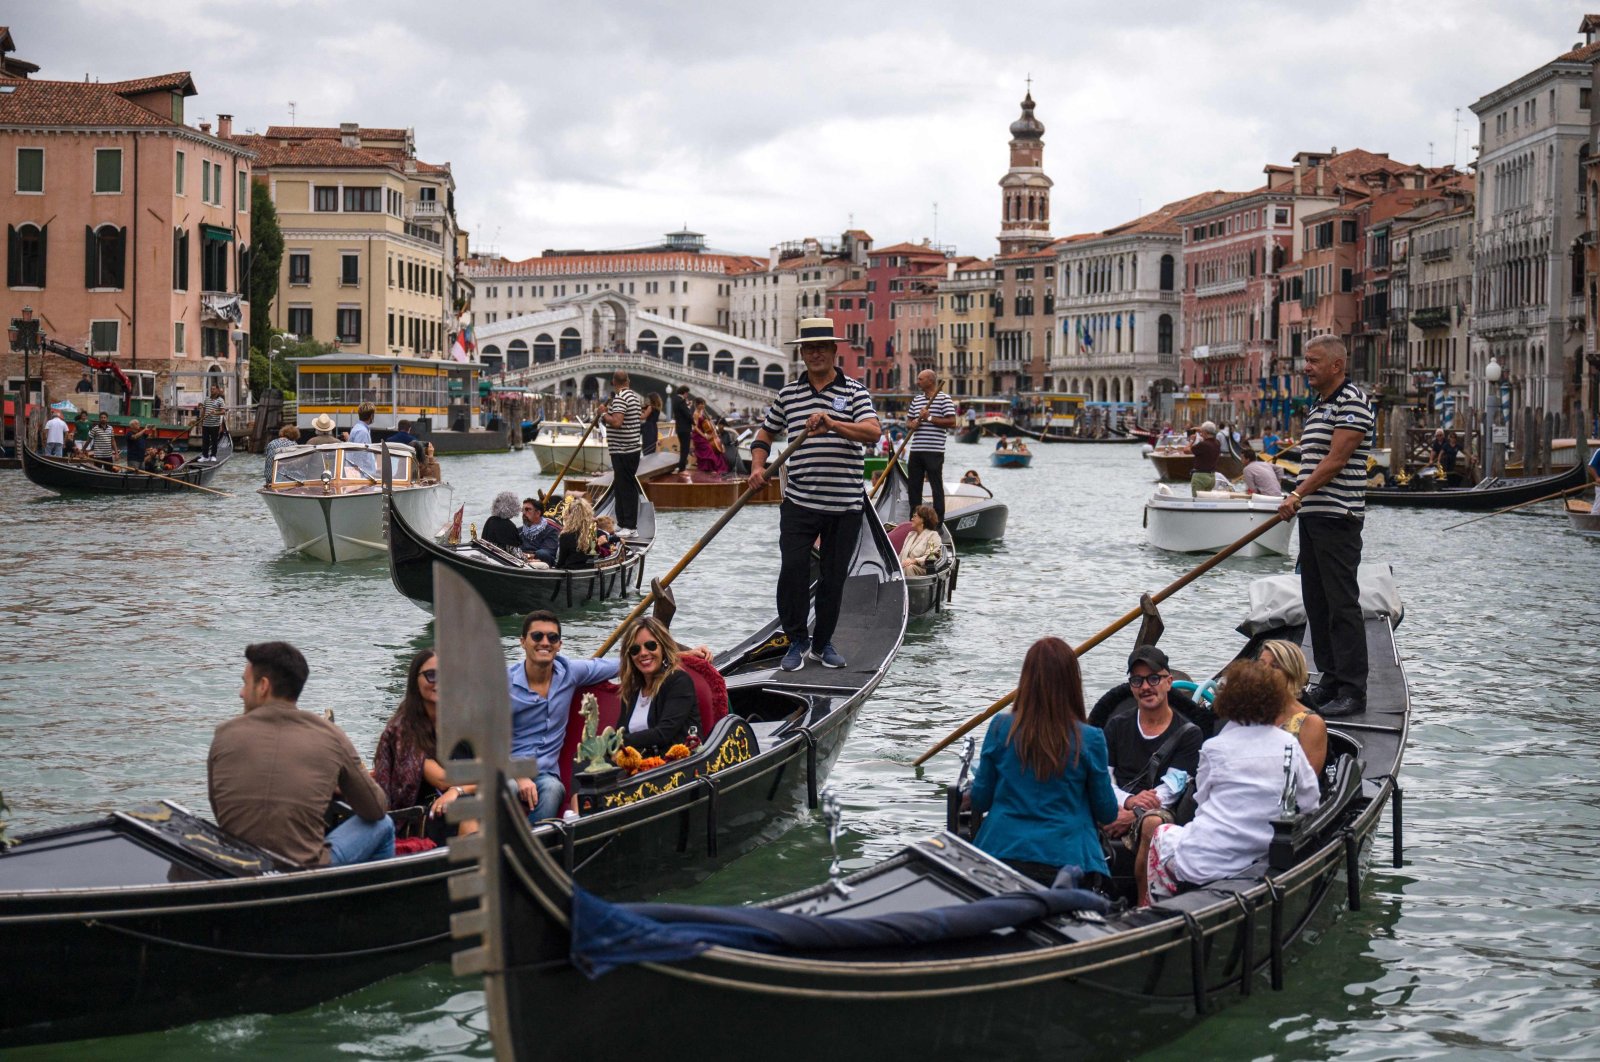 Tourists enjoy a gondola ride on the Grand Canal by the Rialto bridge in Venice, Italy, Sept. 18, 2021. (AFP Photo)